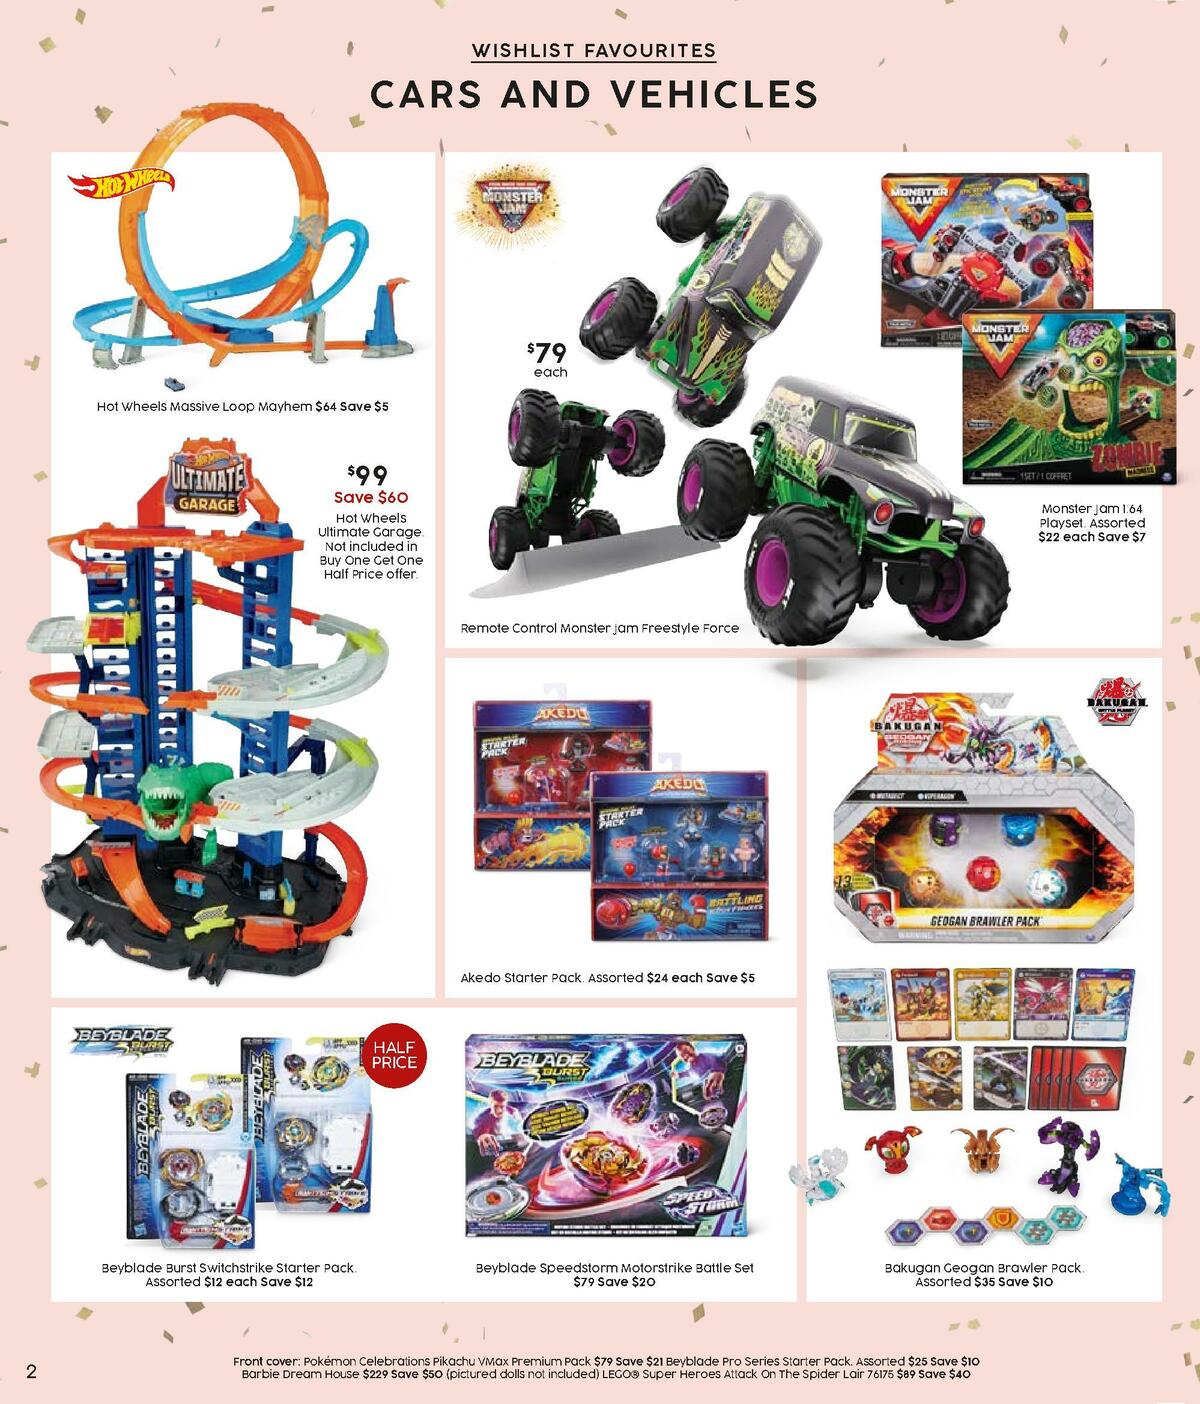 Target Catalogues from 4 November